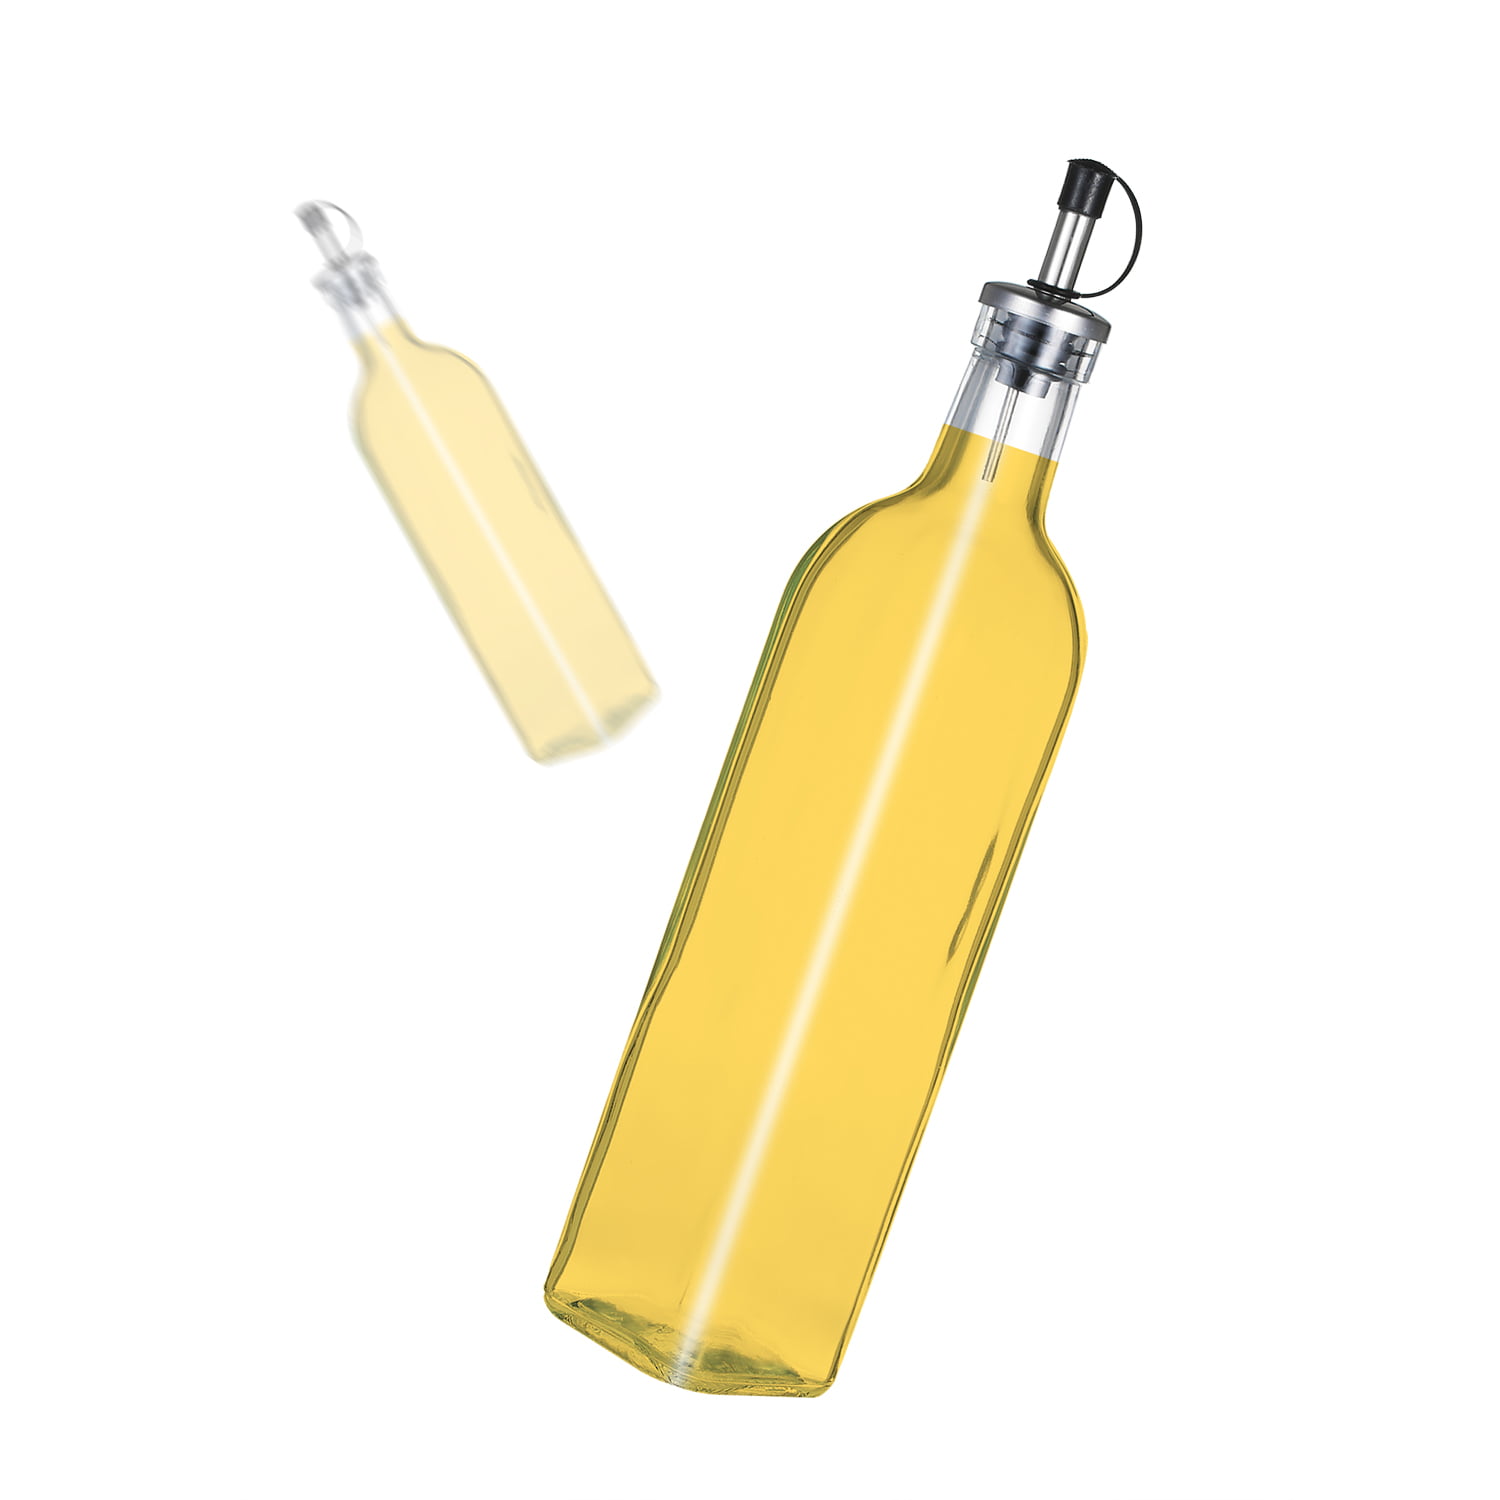 Showvigor Olive Oil Dispenser, Vinegar and Olive Oil Bottle Dispenser 500  ml/17 oz, Oil Bottles for Kitchen with 1 Pourers,2 Labels and 1 Funnel,  Home